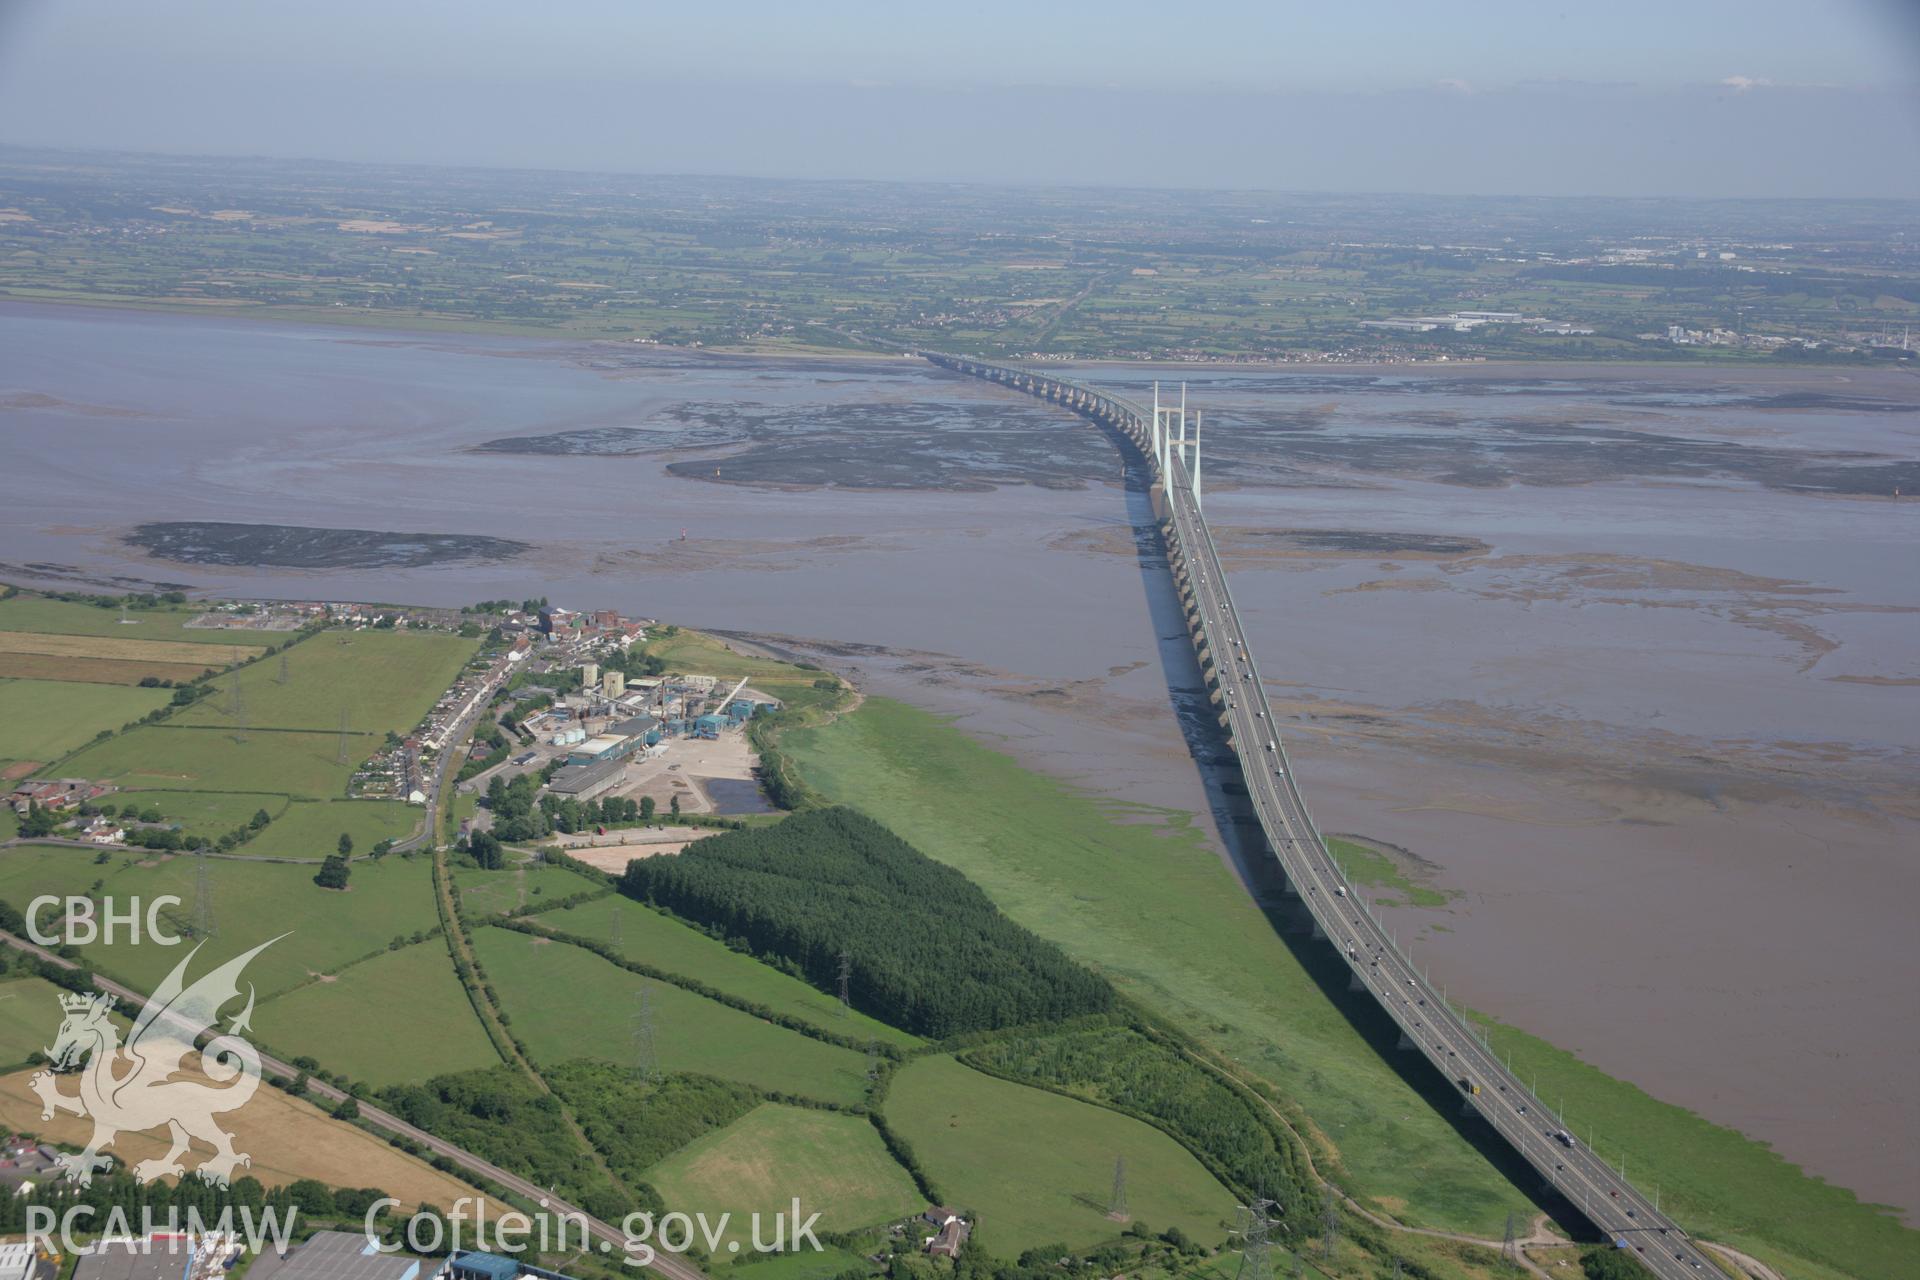 RCAHMW colour oblique aerial photograph of the Second Severn Crossing. Taken on 13 July 2006 by Toby Driver.